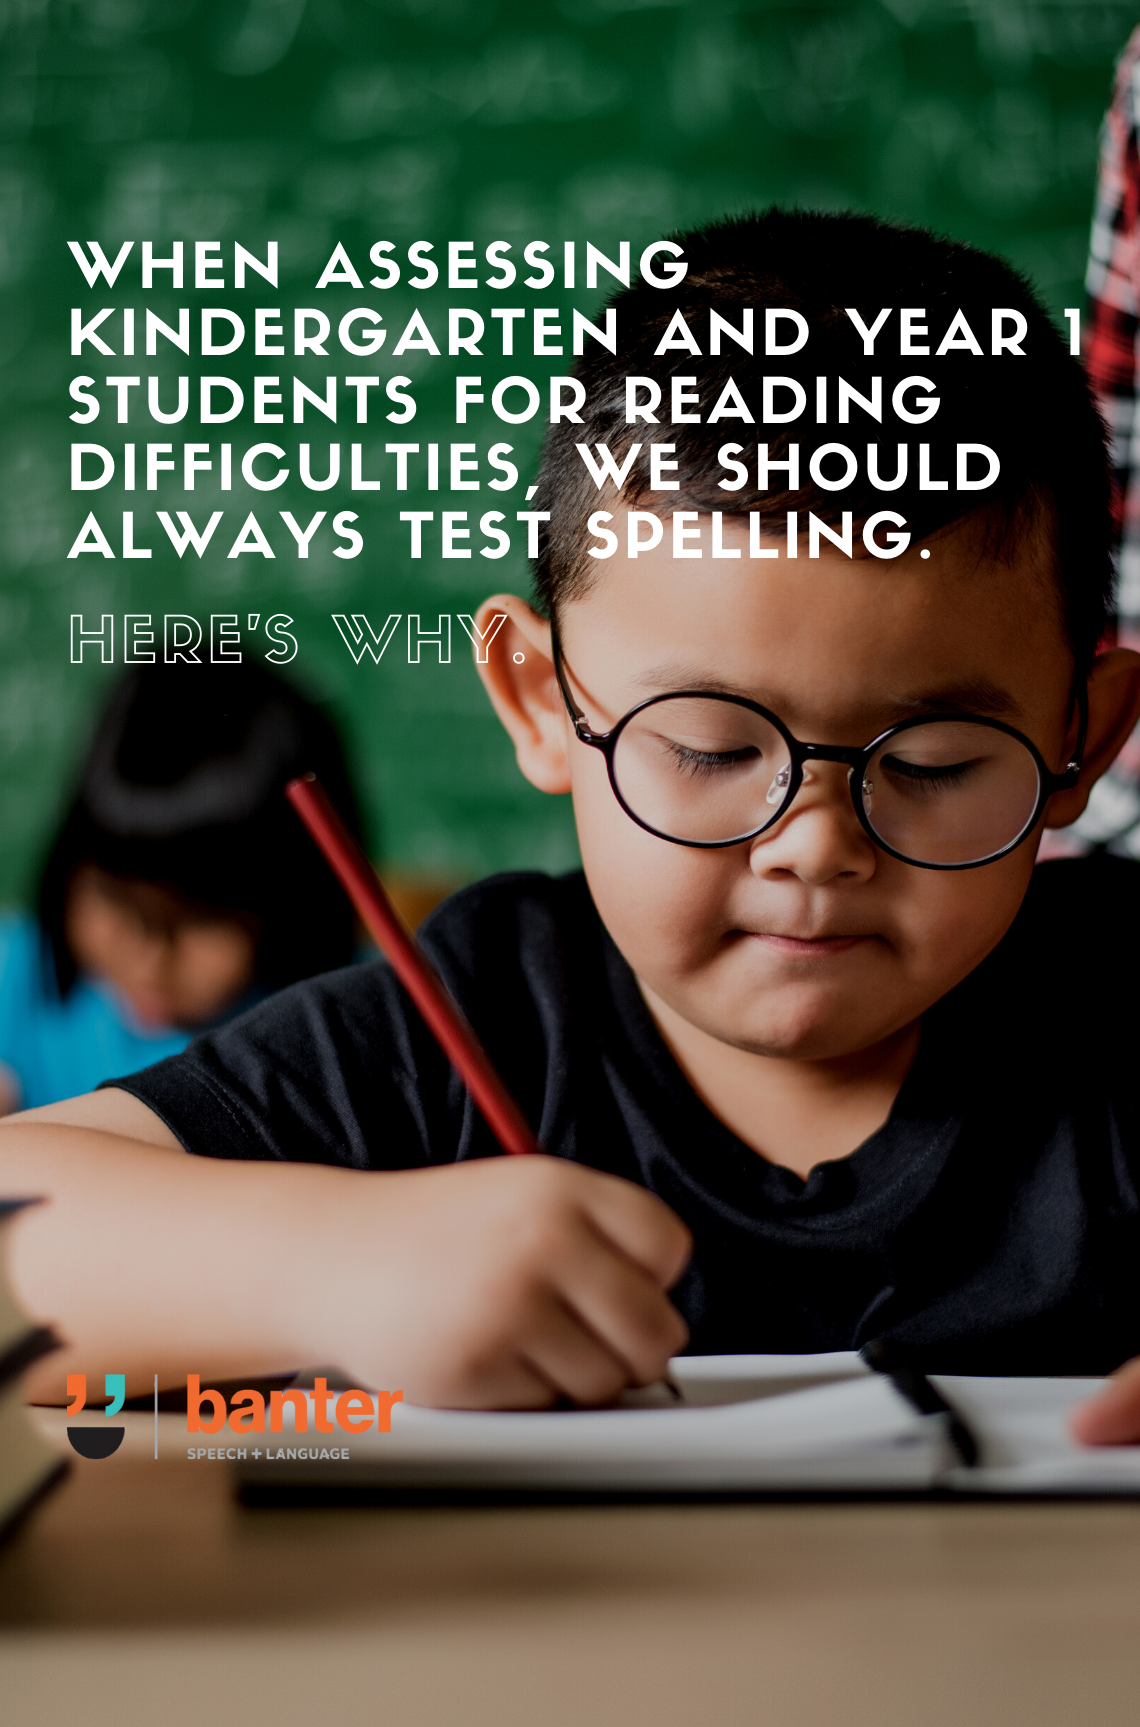 When assessing Kindergarten and Year 1 students for reading difficulties, we should always test spelling. Here's why